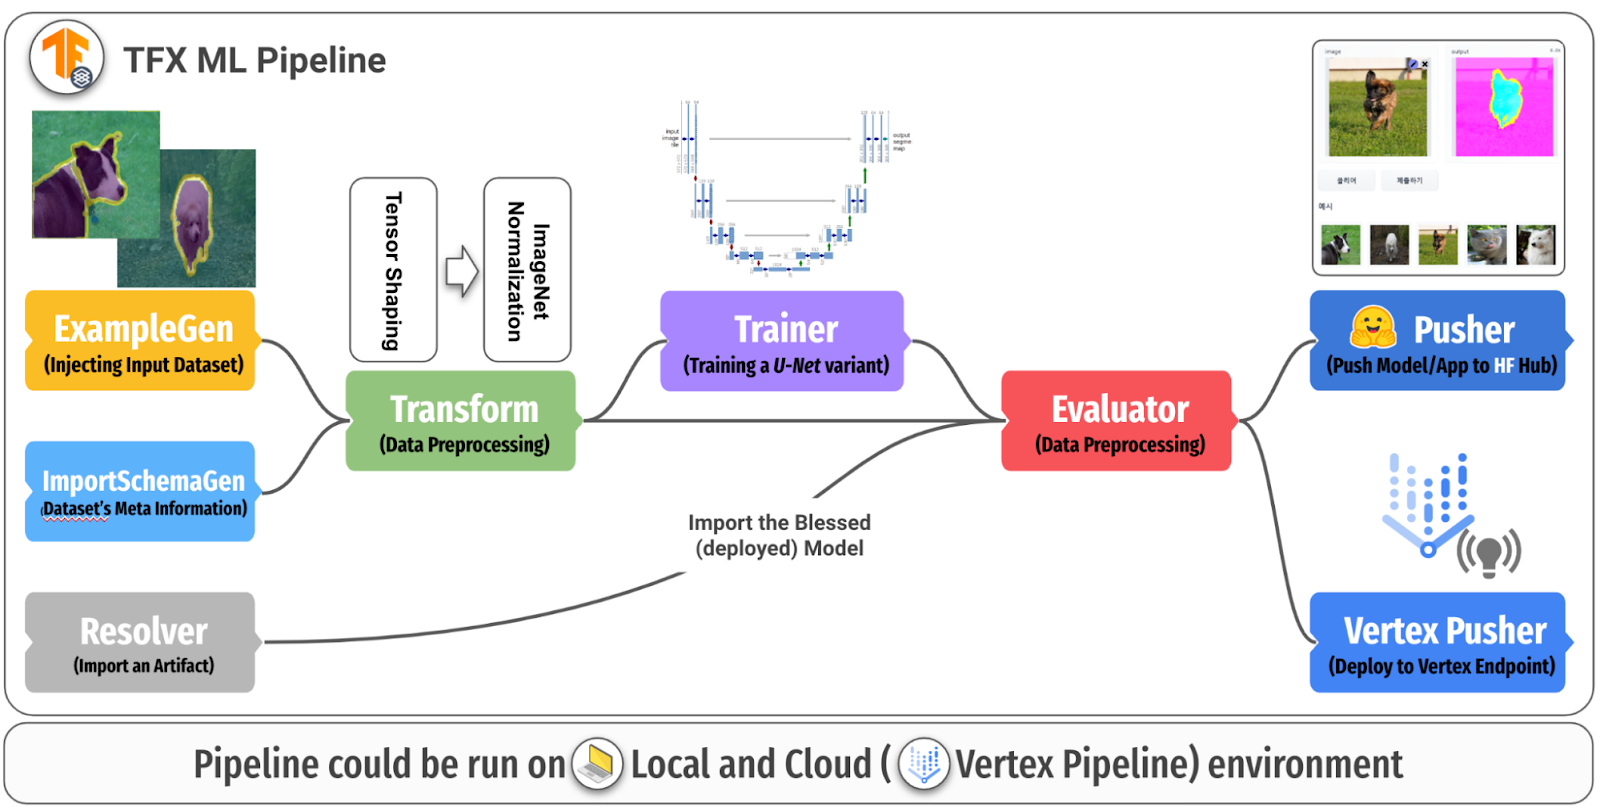 Flowchart showing overview of the TFX ML pipeline. Pipeline could be run on Local and Cloud(Vertex Pipeline) environment